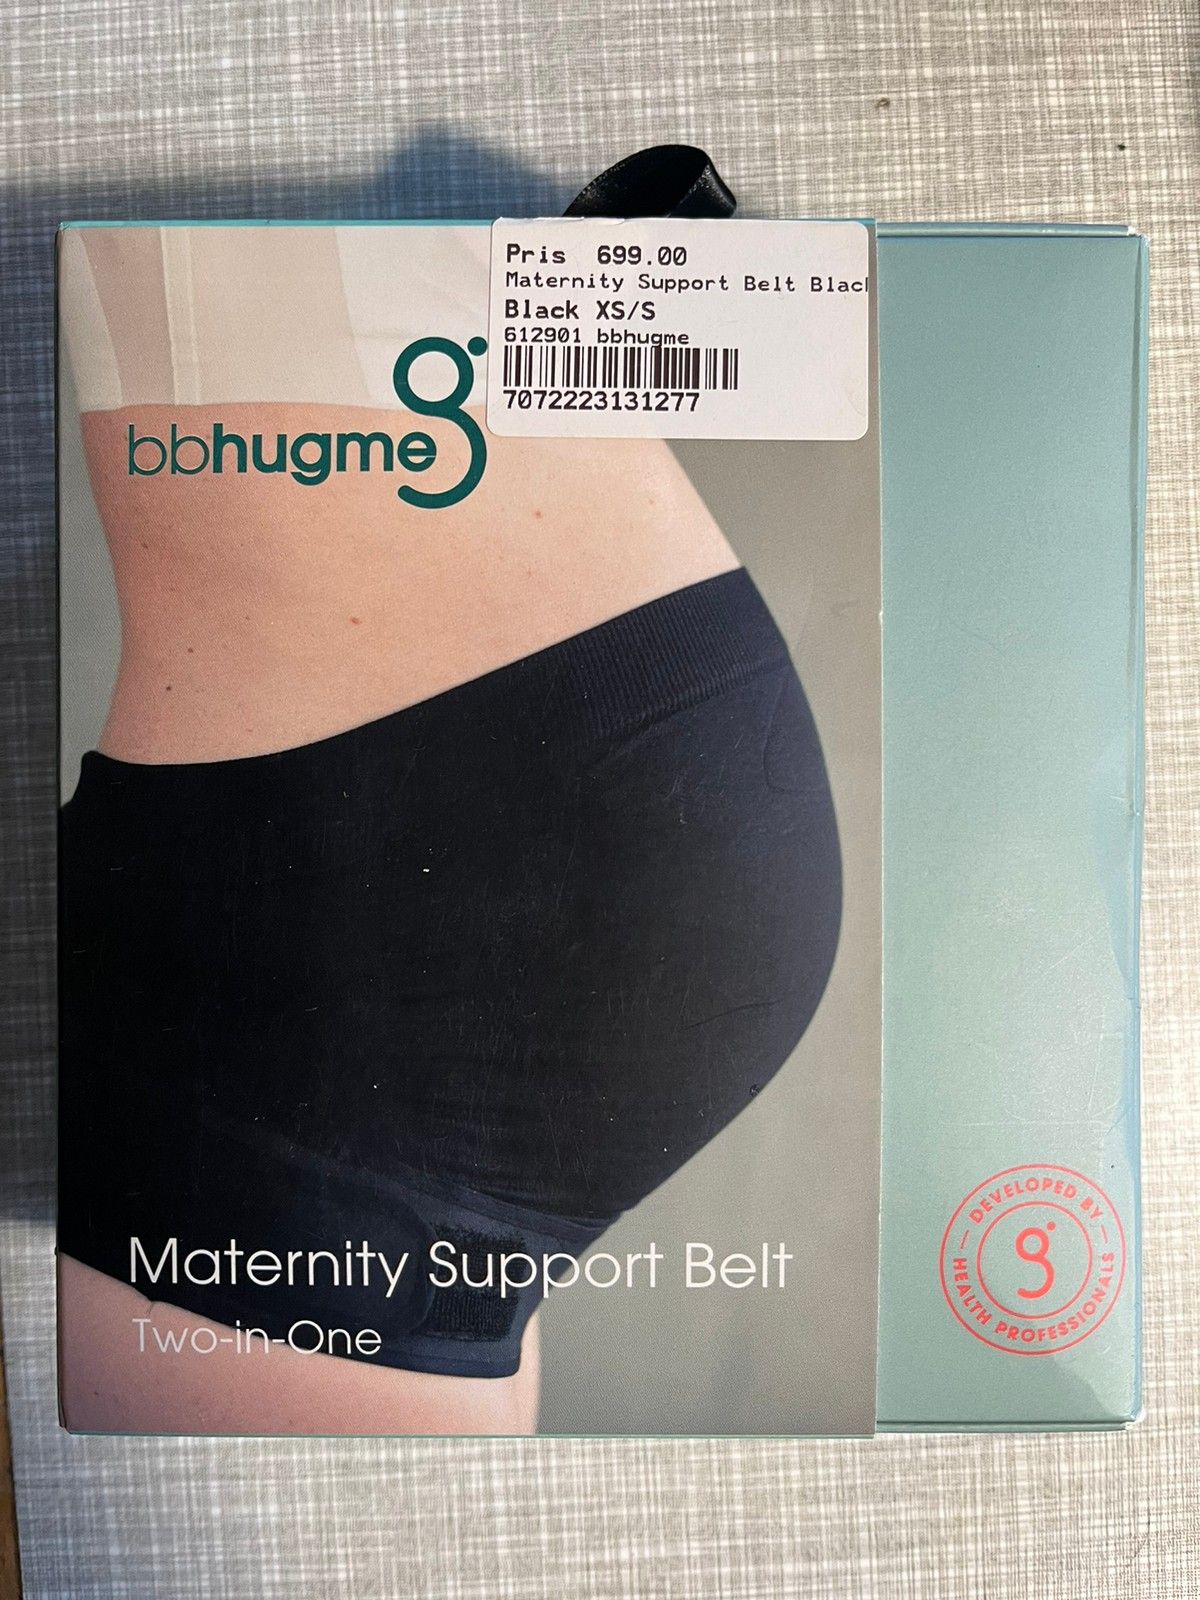 BBhugme maternity support belt XS/S